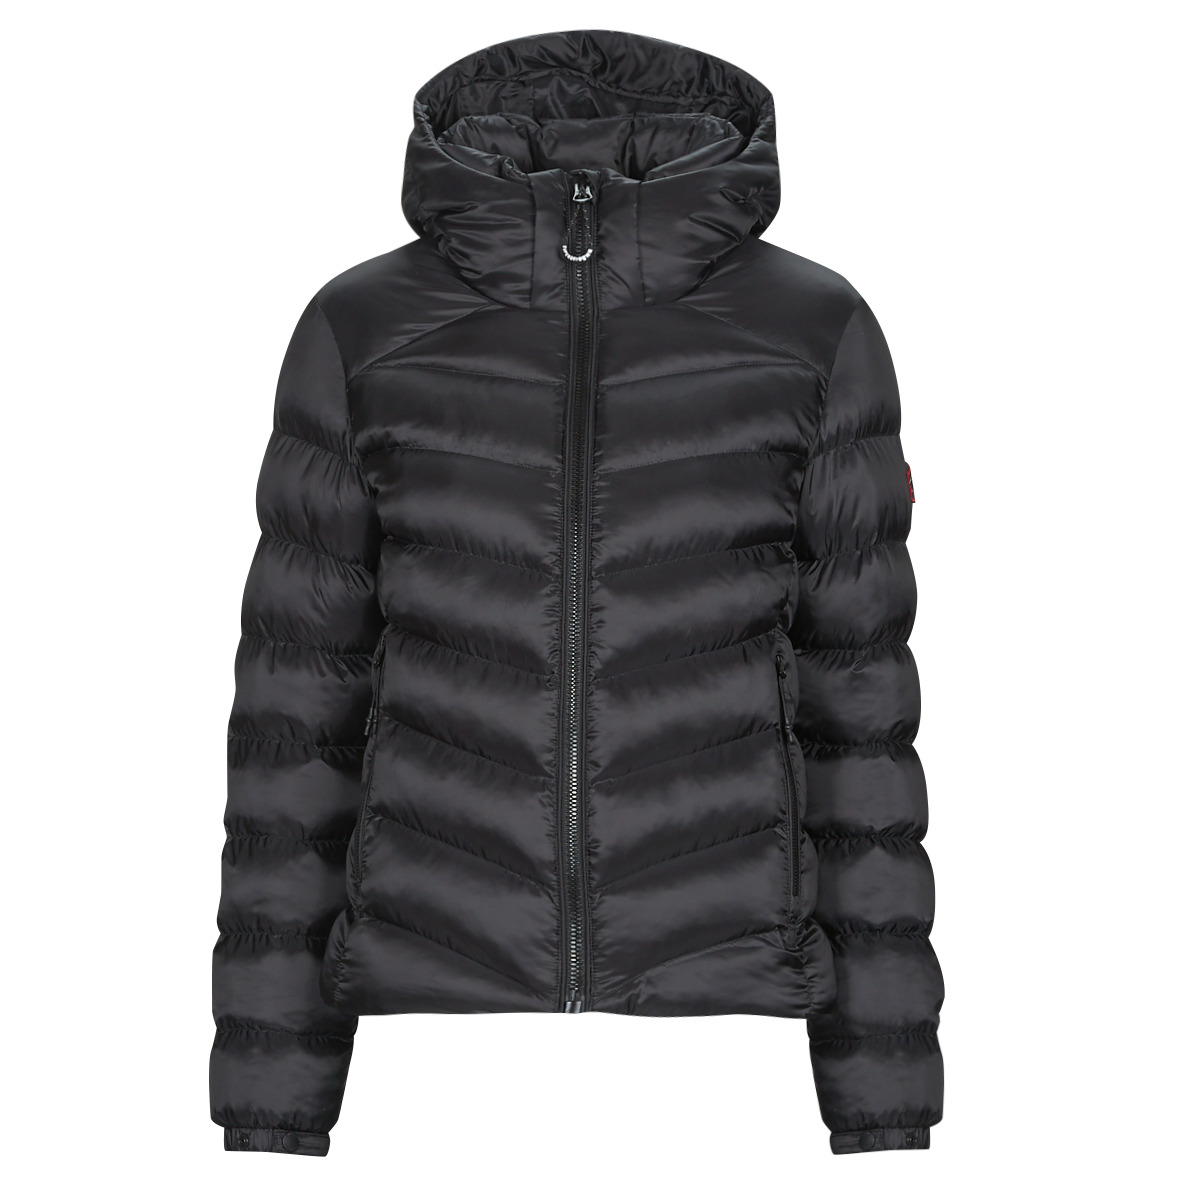 Superdry HOODED FUJI PADDED - | NET Clothing - Women delivery Black Duffel Free Spartoo ! coats JACKET